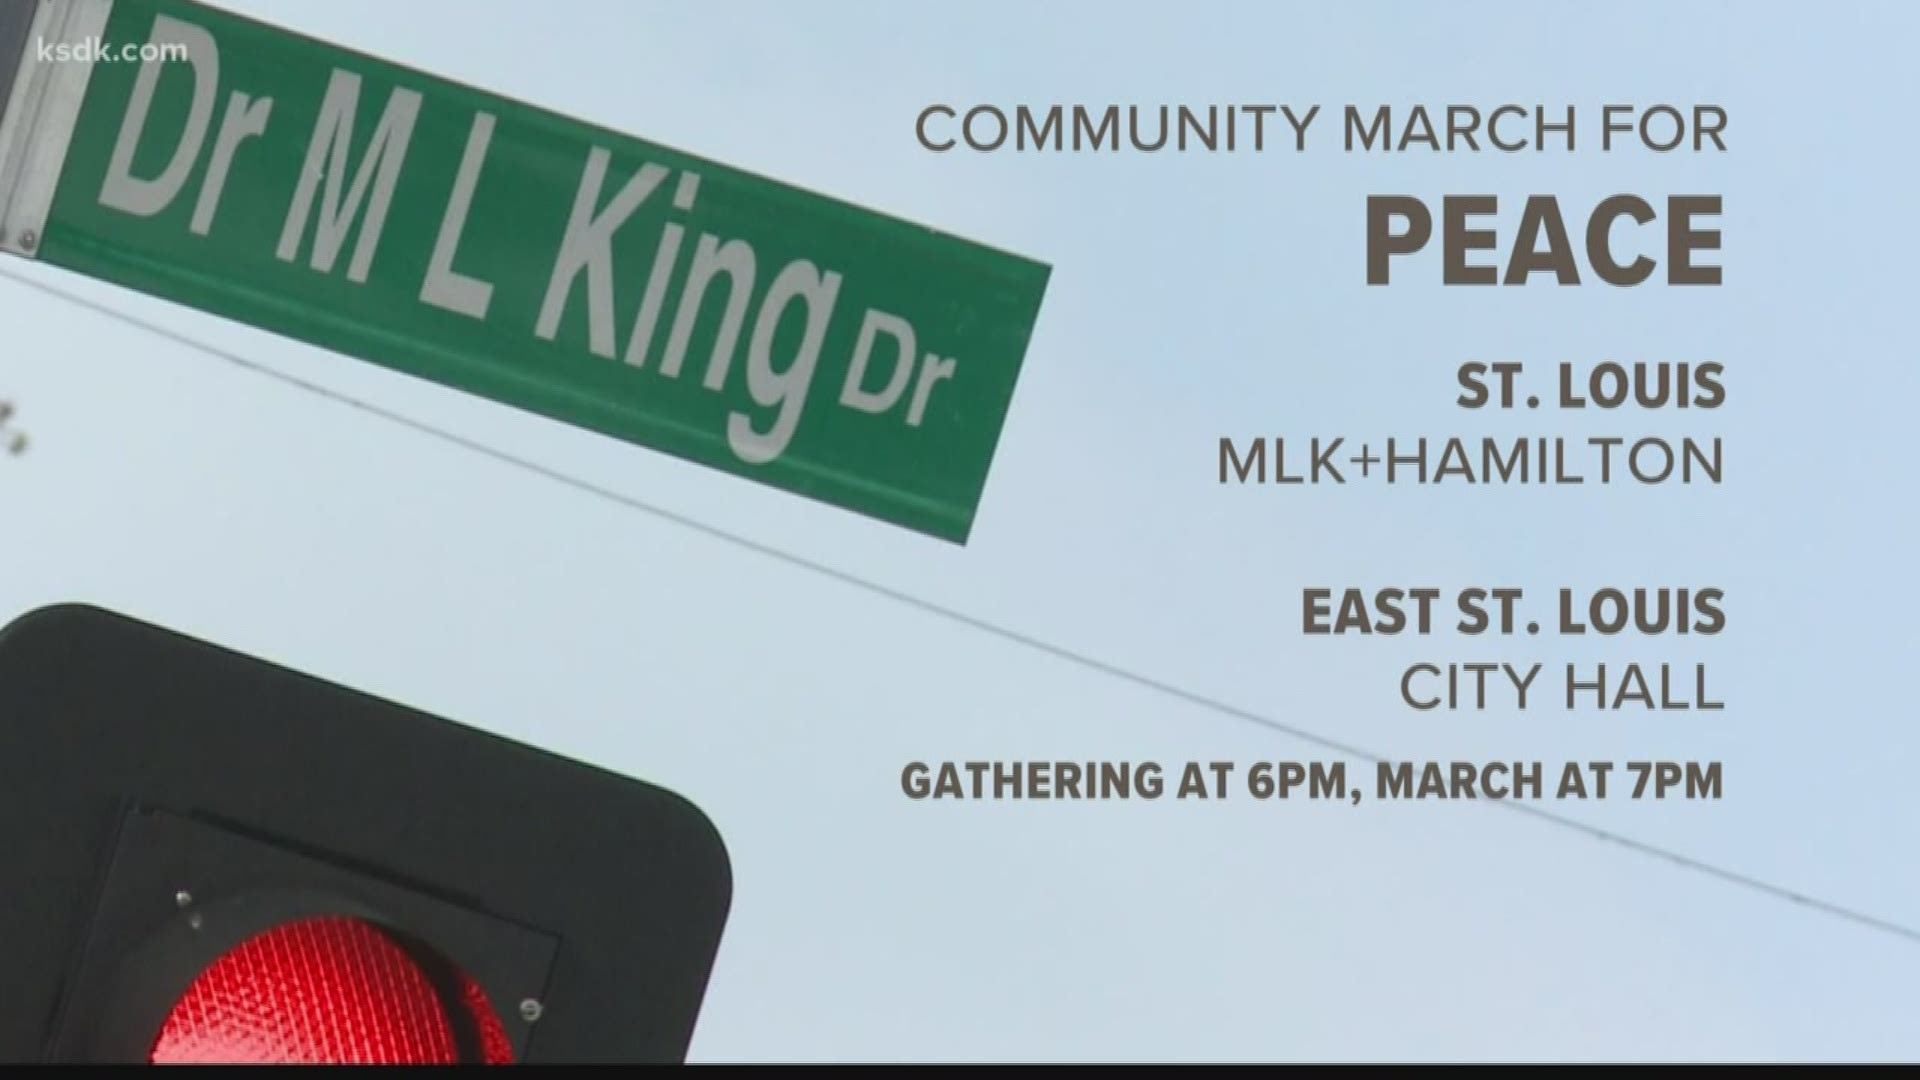 There will be a 'Community March for Peace' in the City of St. Louis and East St. Louis, Illinois on Feb. 24